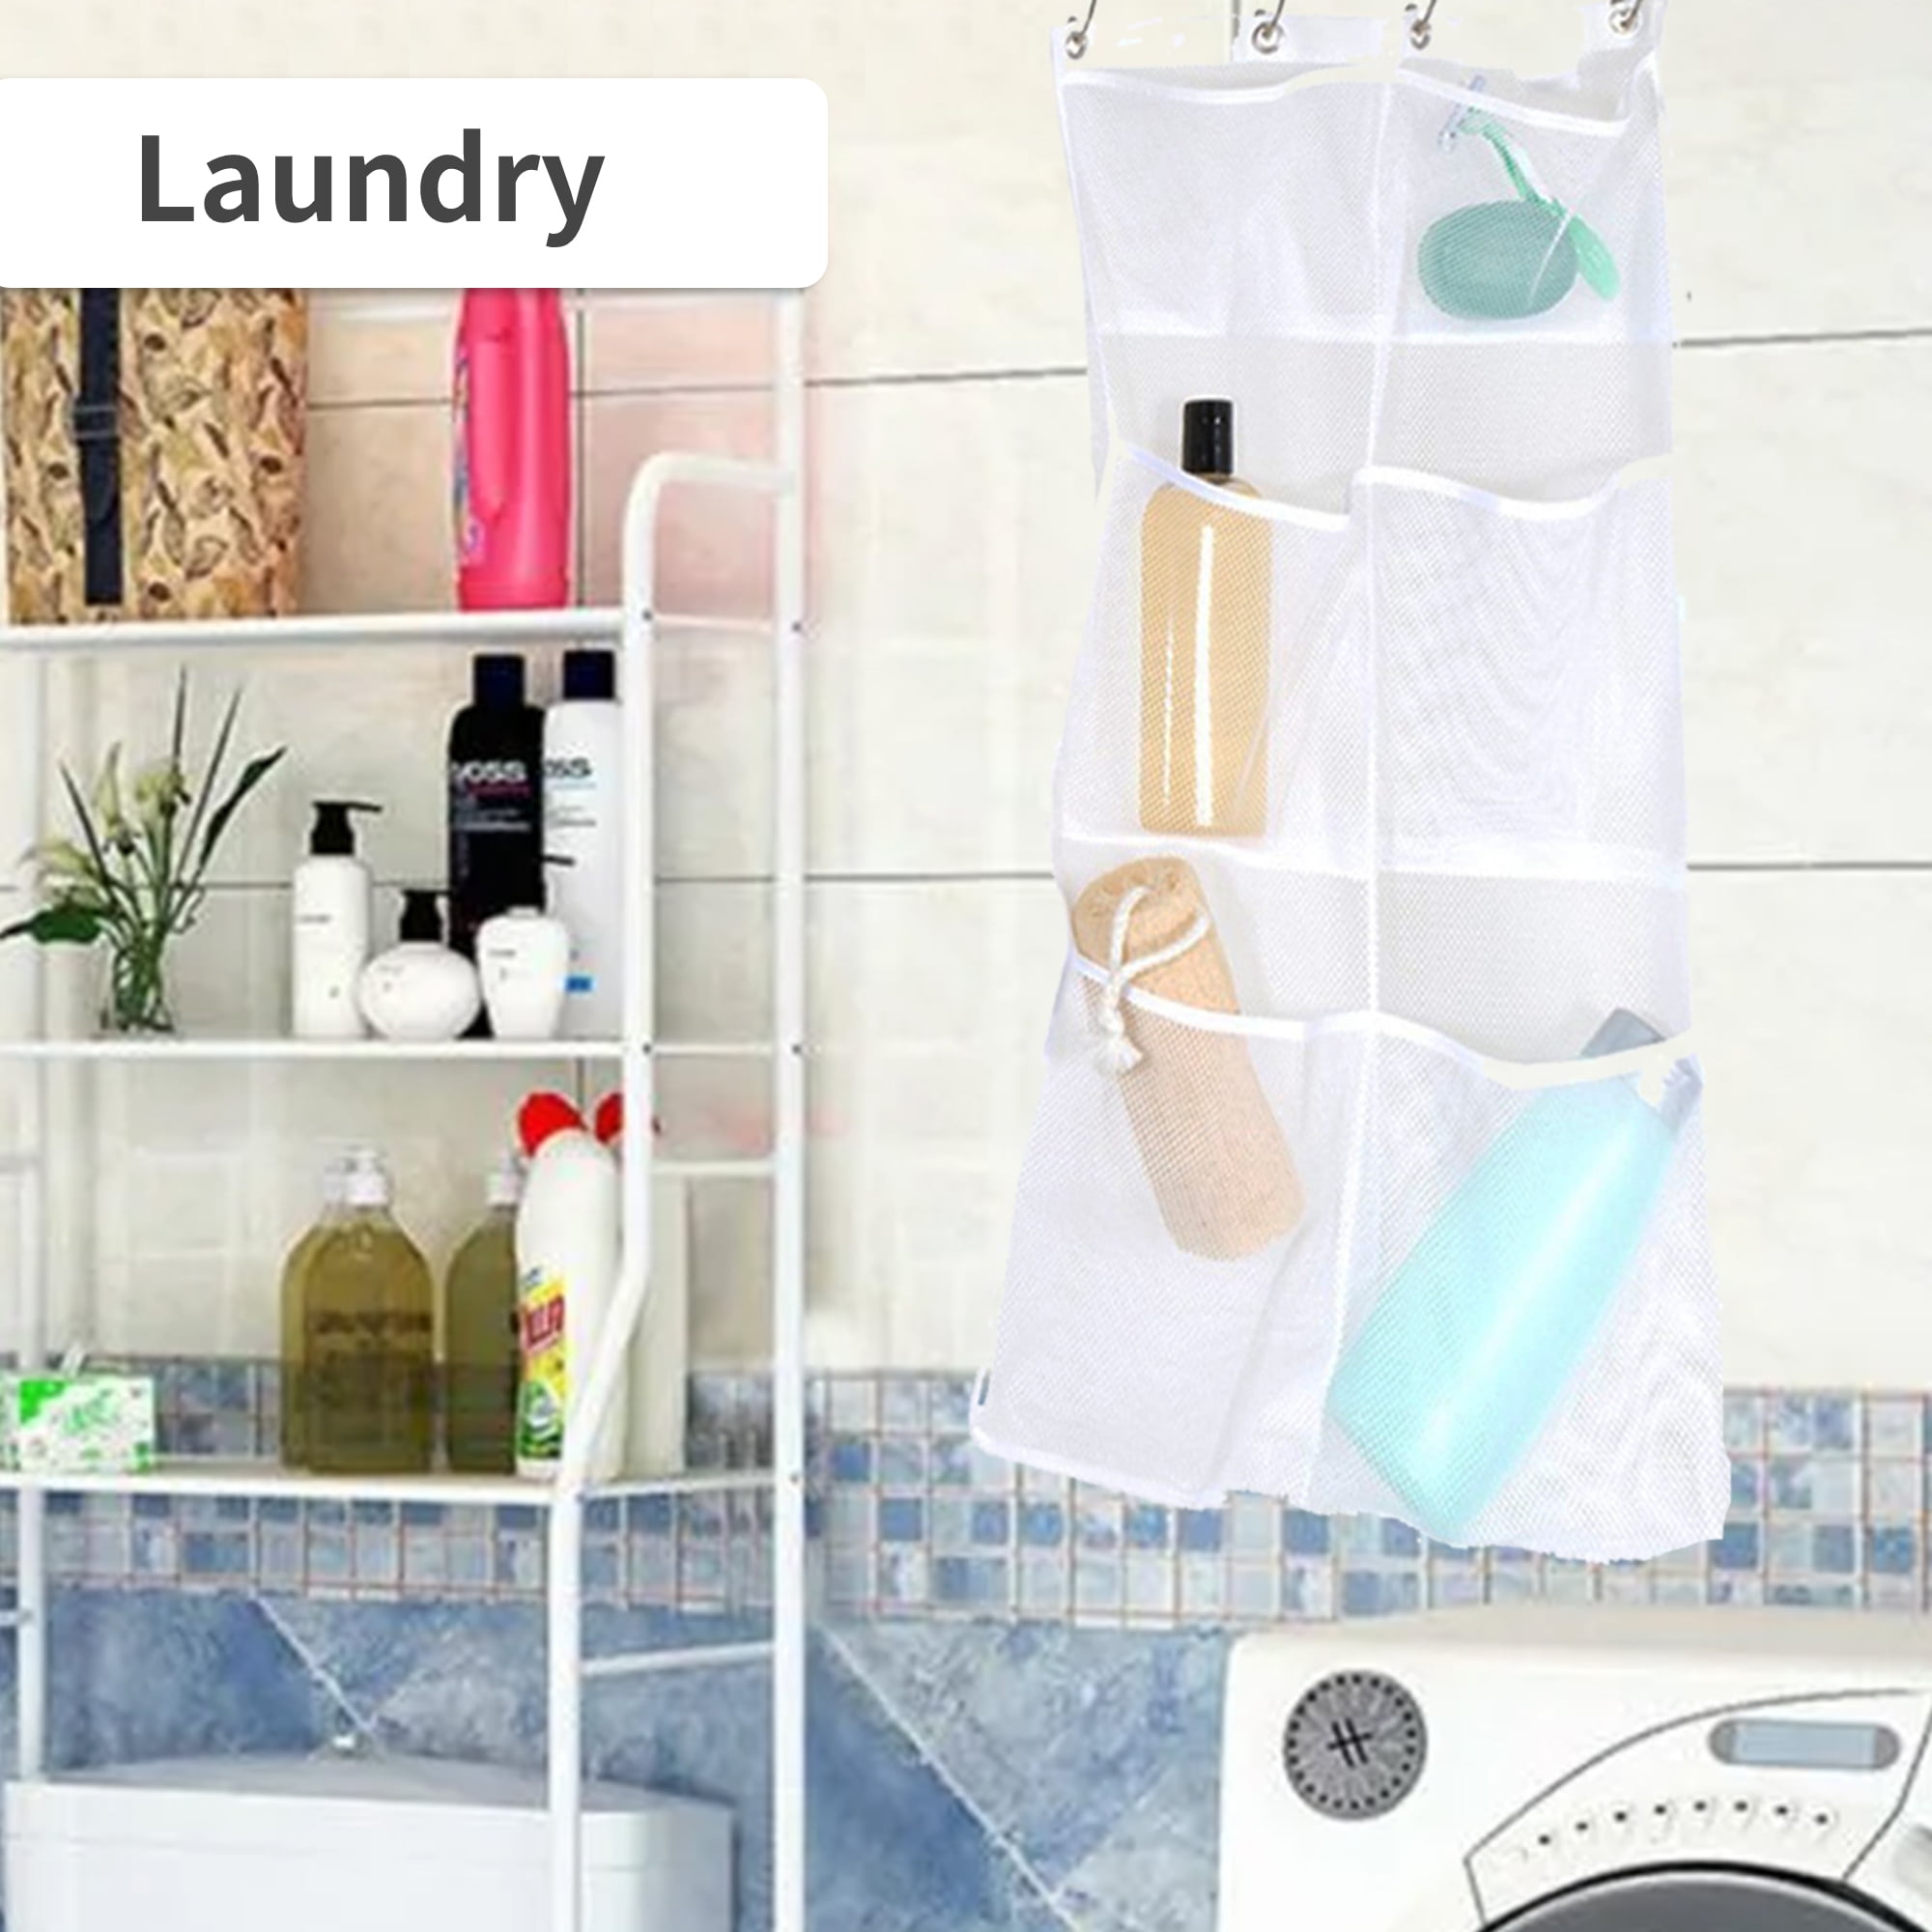 STARUBY 7 Pockets Mesh Shower Caddy Bathroom Hanging Mesh Bath Organizer  Shower Curtains Rod Hanging Caddies with 3 Hanging Rings and 3 Hooks for  Selection, 17 x 26 Inch, White_Staruby